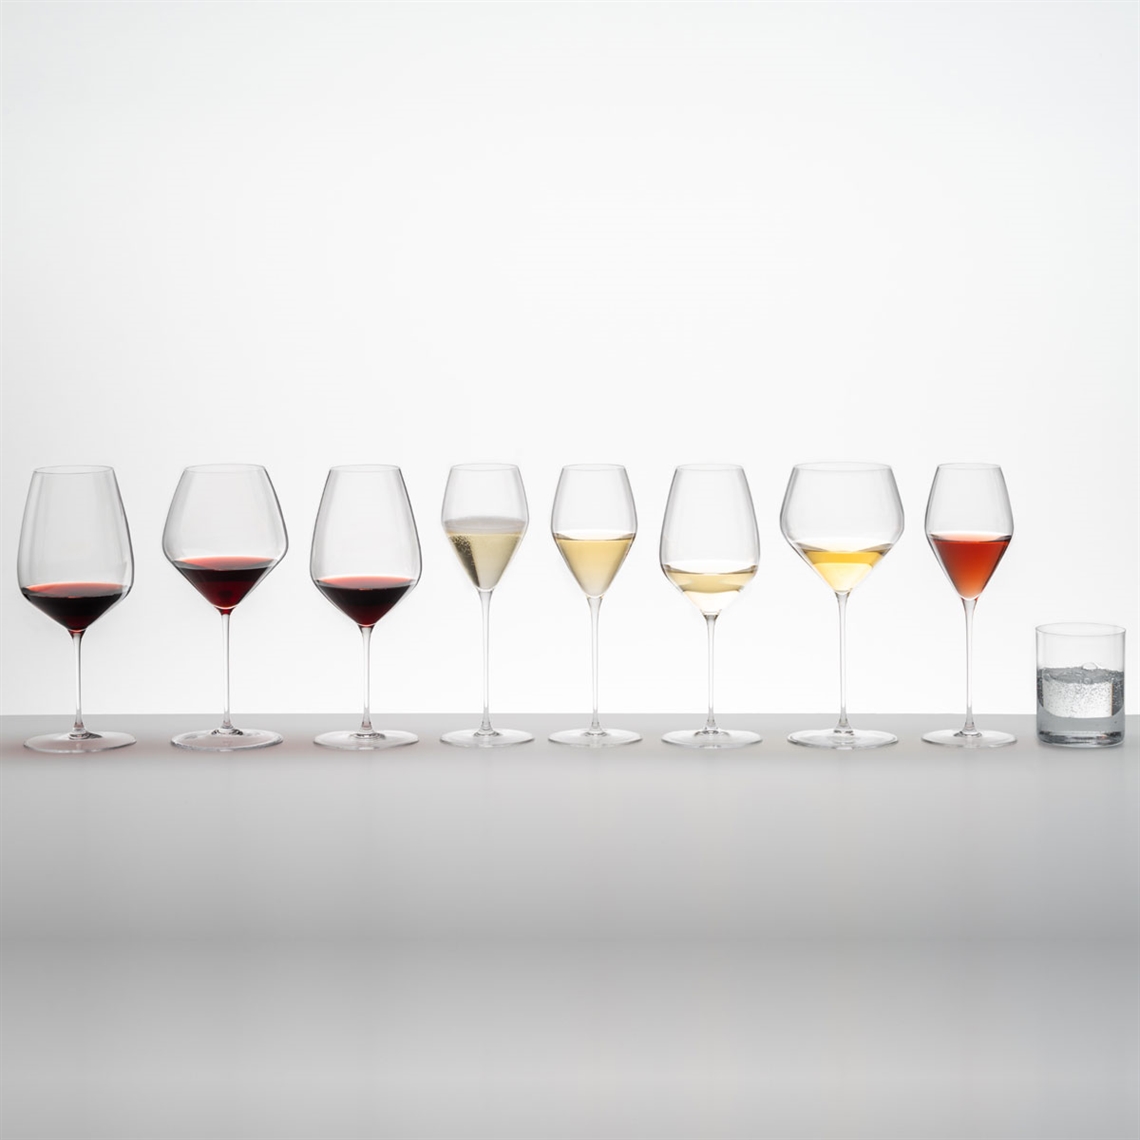 View our collection of Riedel Veloce Which Riedel wine glass to choose